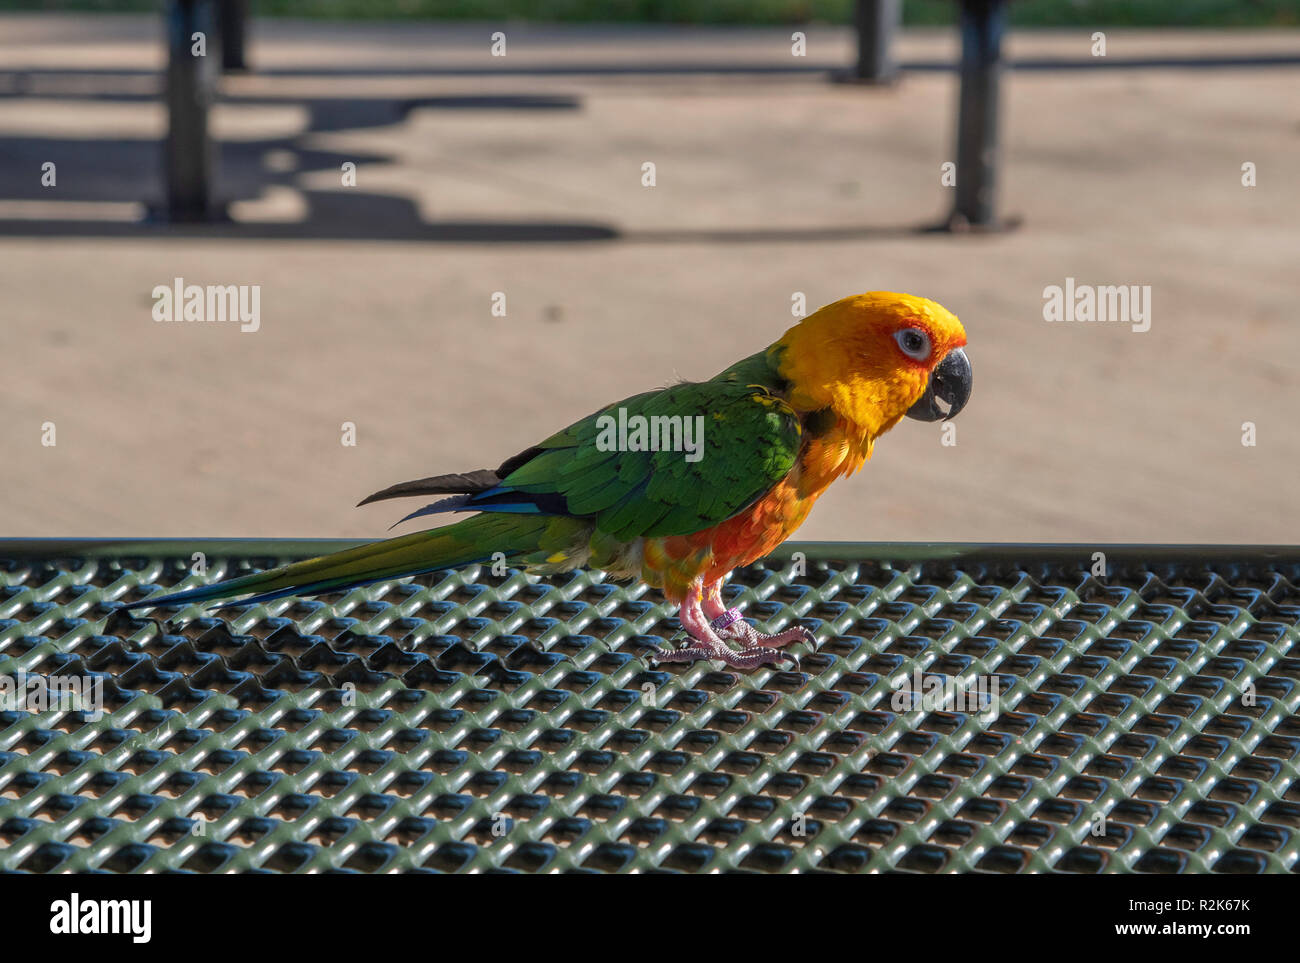 A Jenday Conure, Aratinga jandaya, a type of small parrot, stands on a metal surface in the evening light. Stock Photo